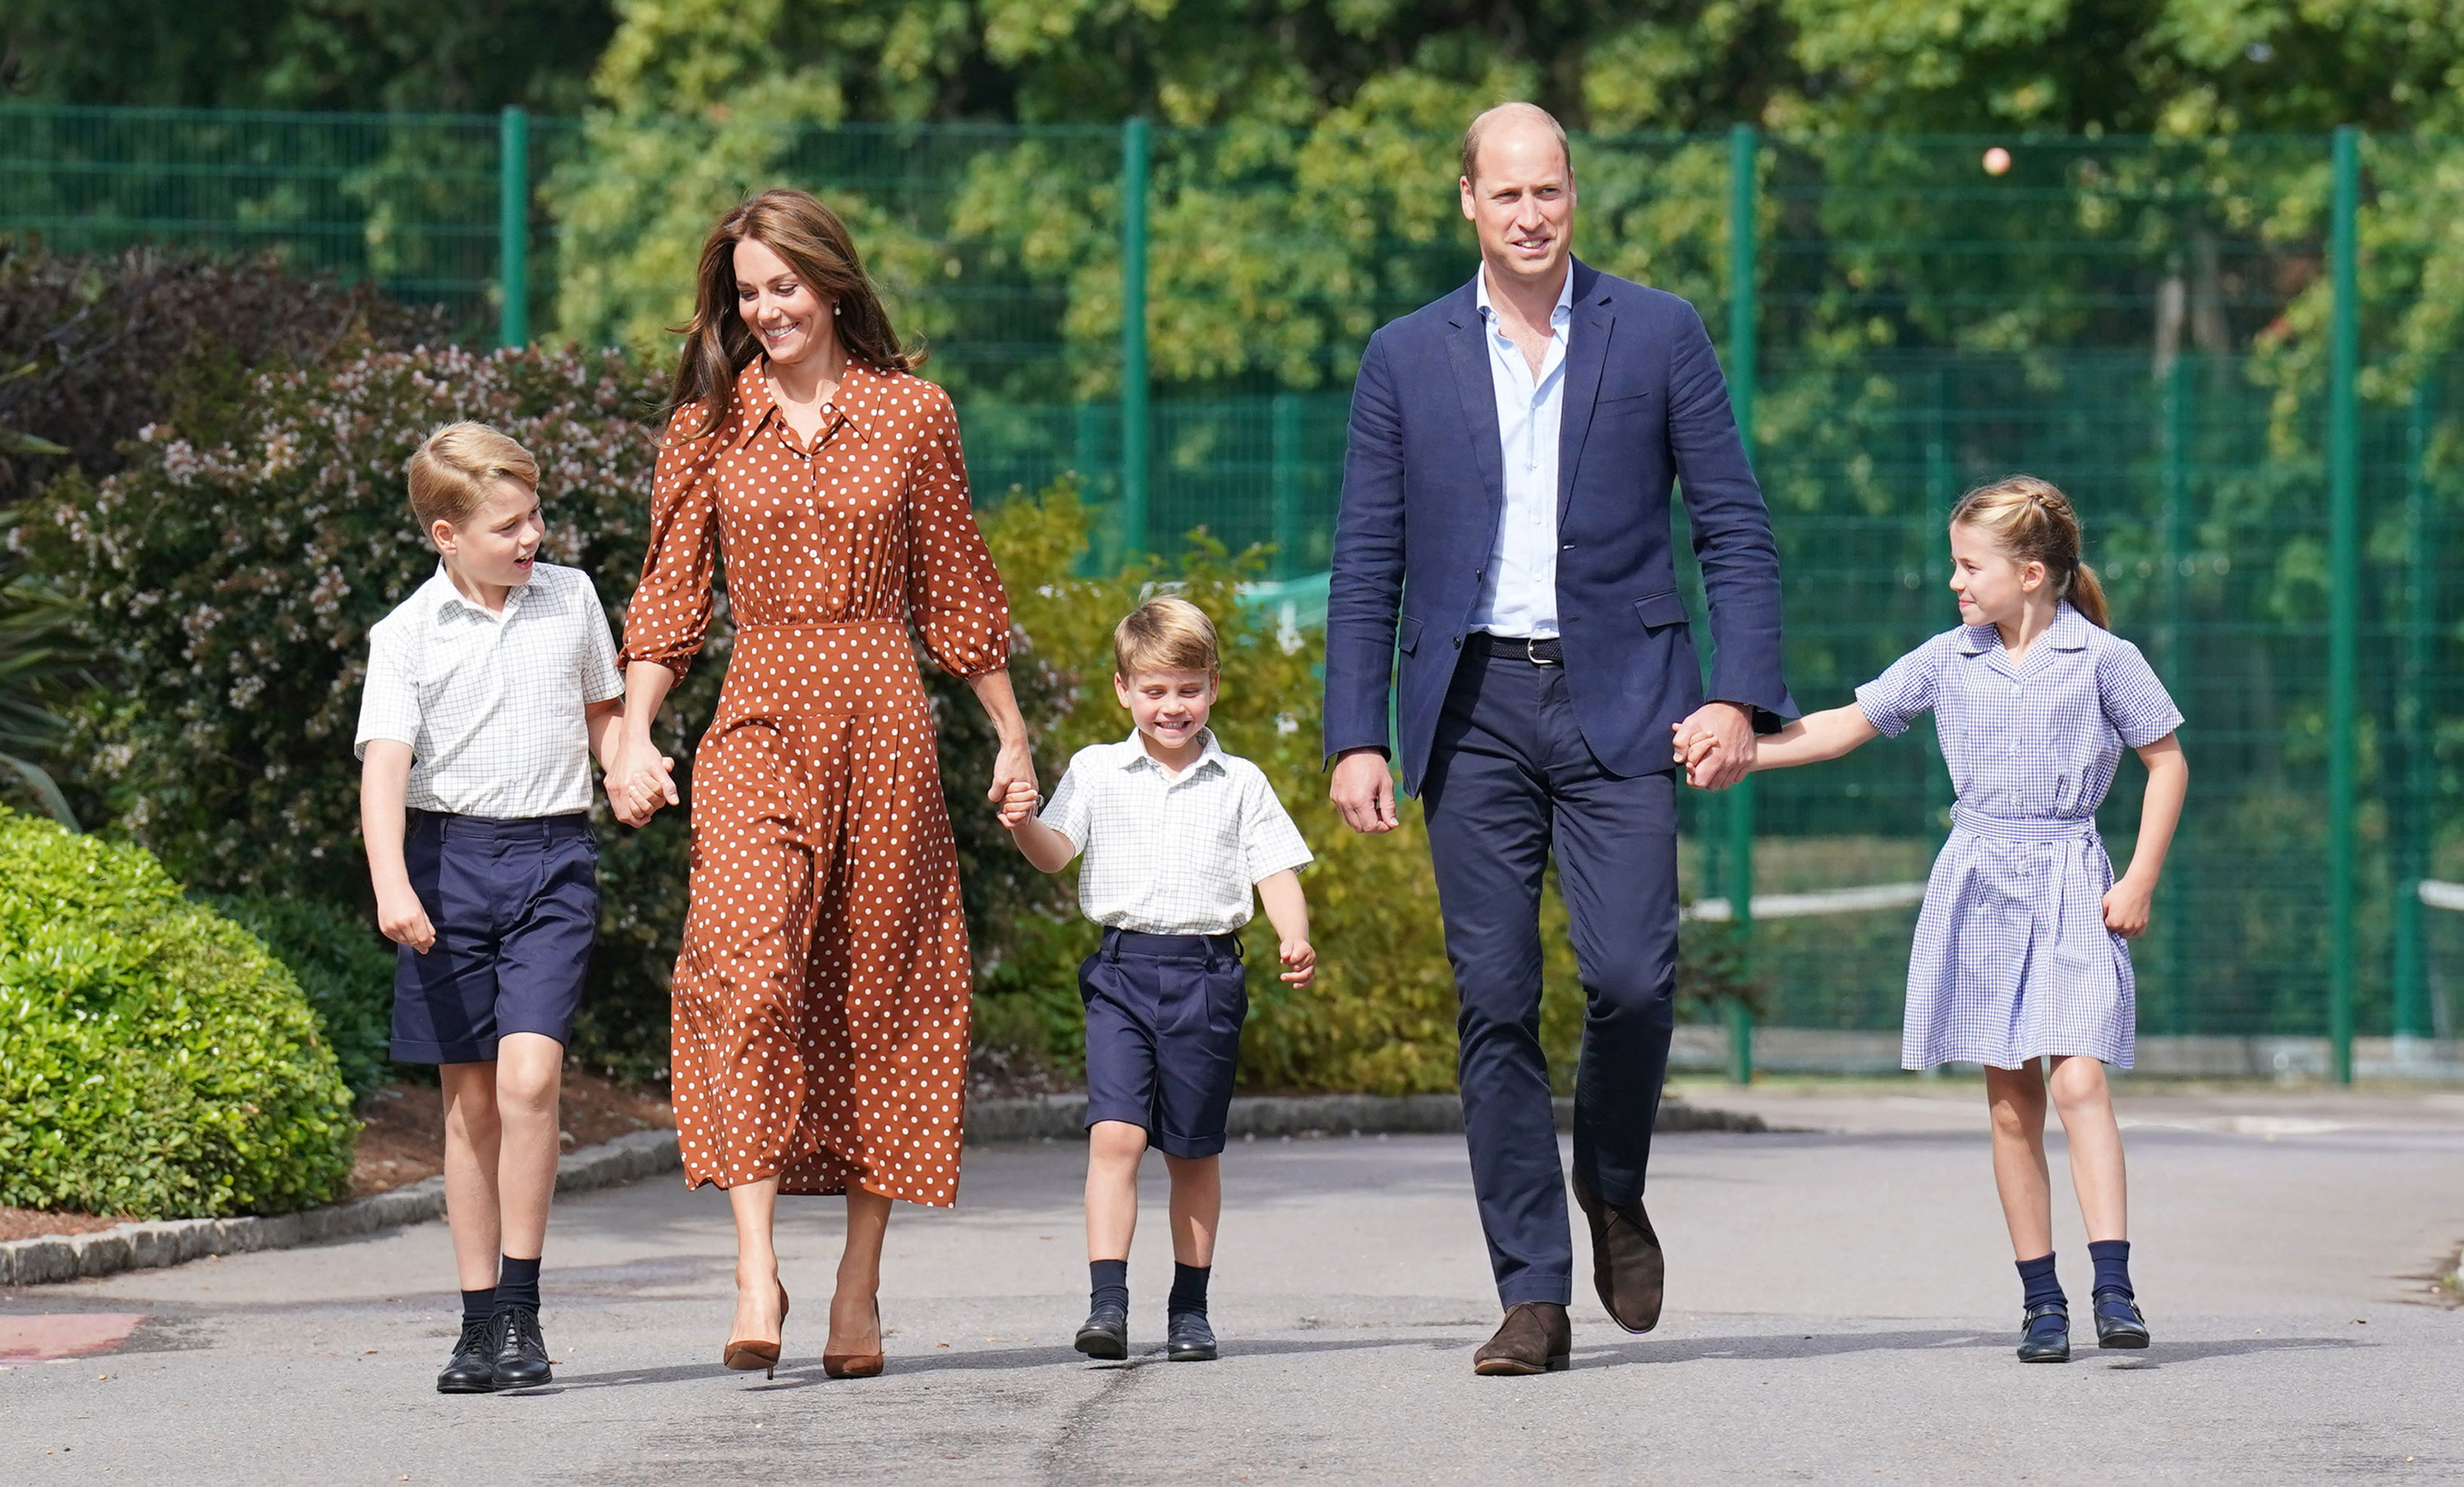 Prince George, left, Prince Louis, center, and Princess Charlotte are accompanied by their parents Prince William and Catherine as they arrive at Lambrook School on September 7 in Bracknell, England.